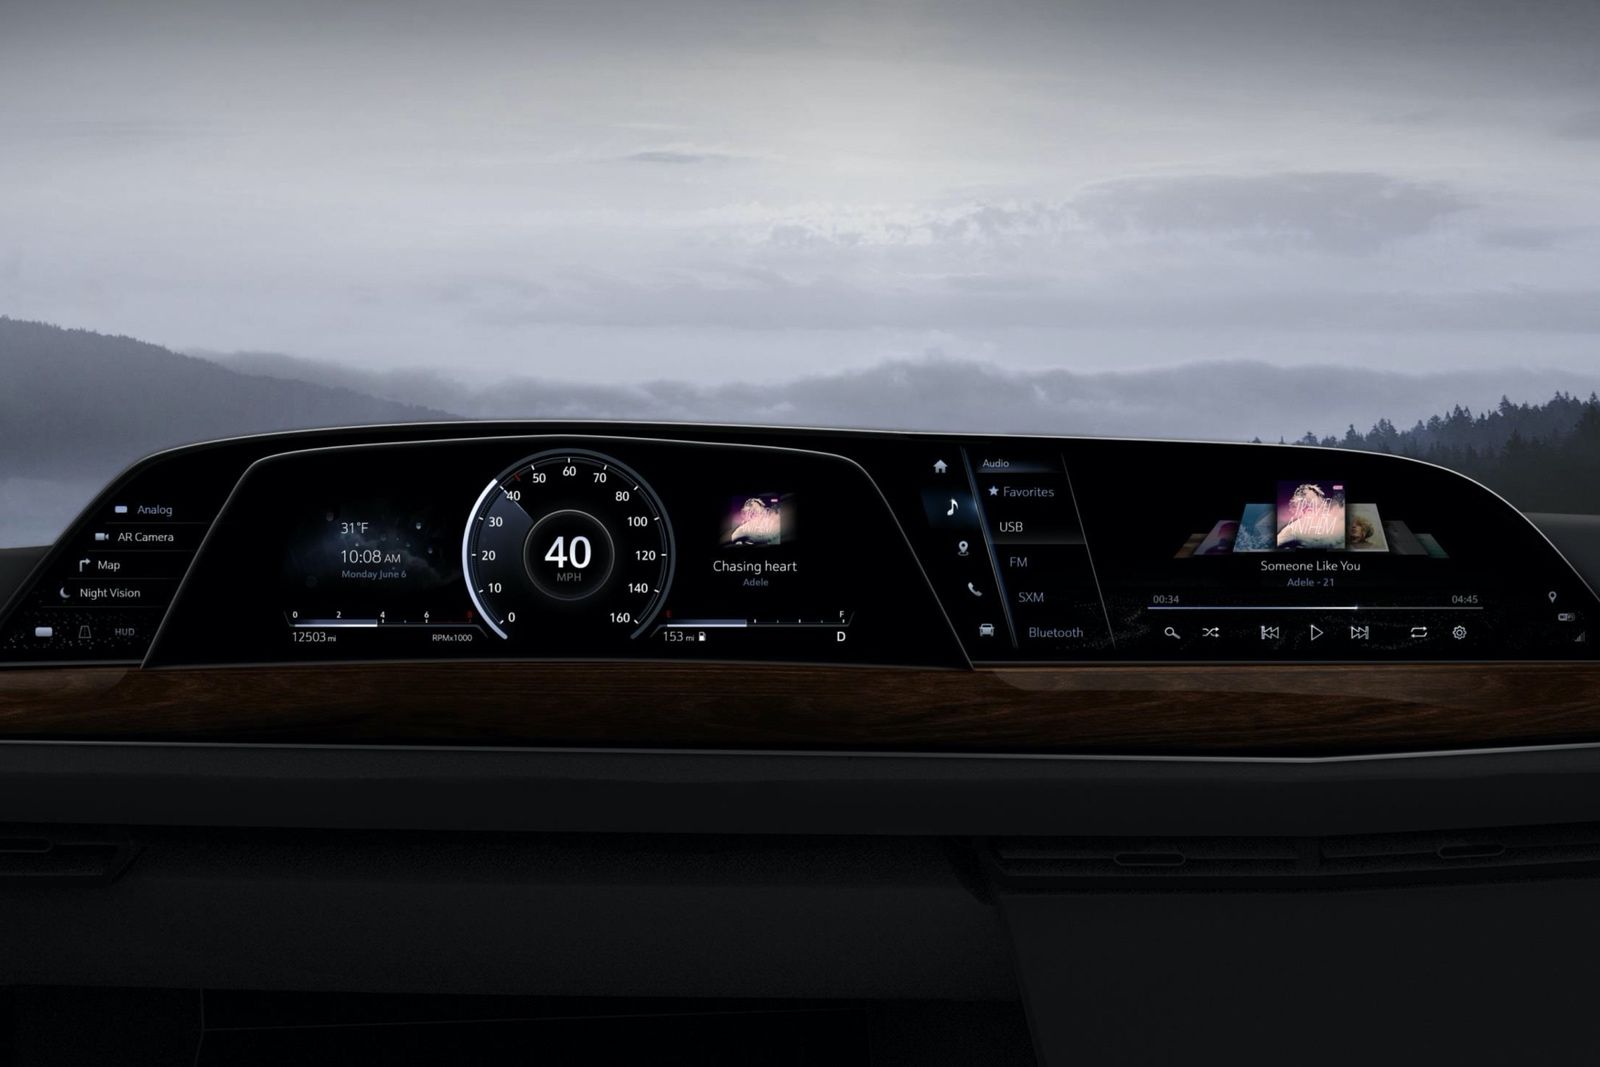 LG will put the first curved OLED in a car in the 2021 Cadillac Escalade image 1